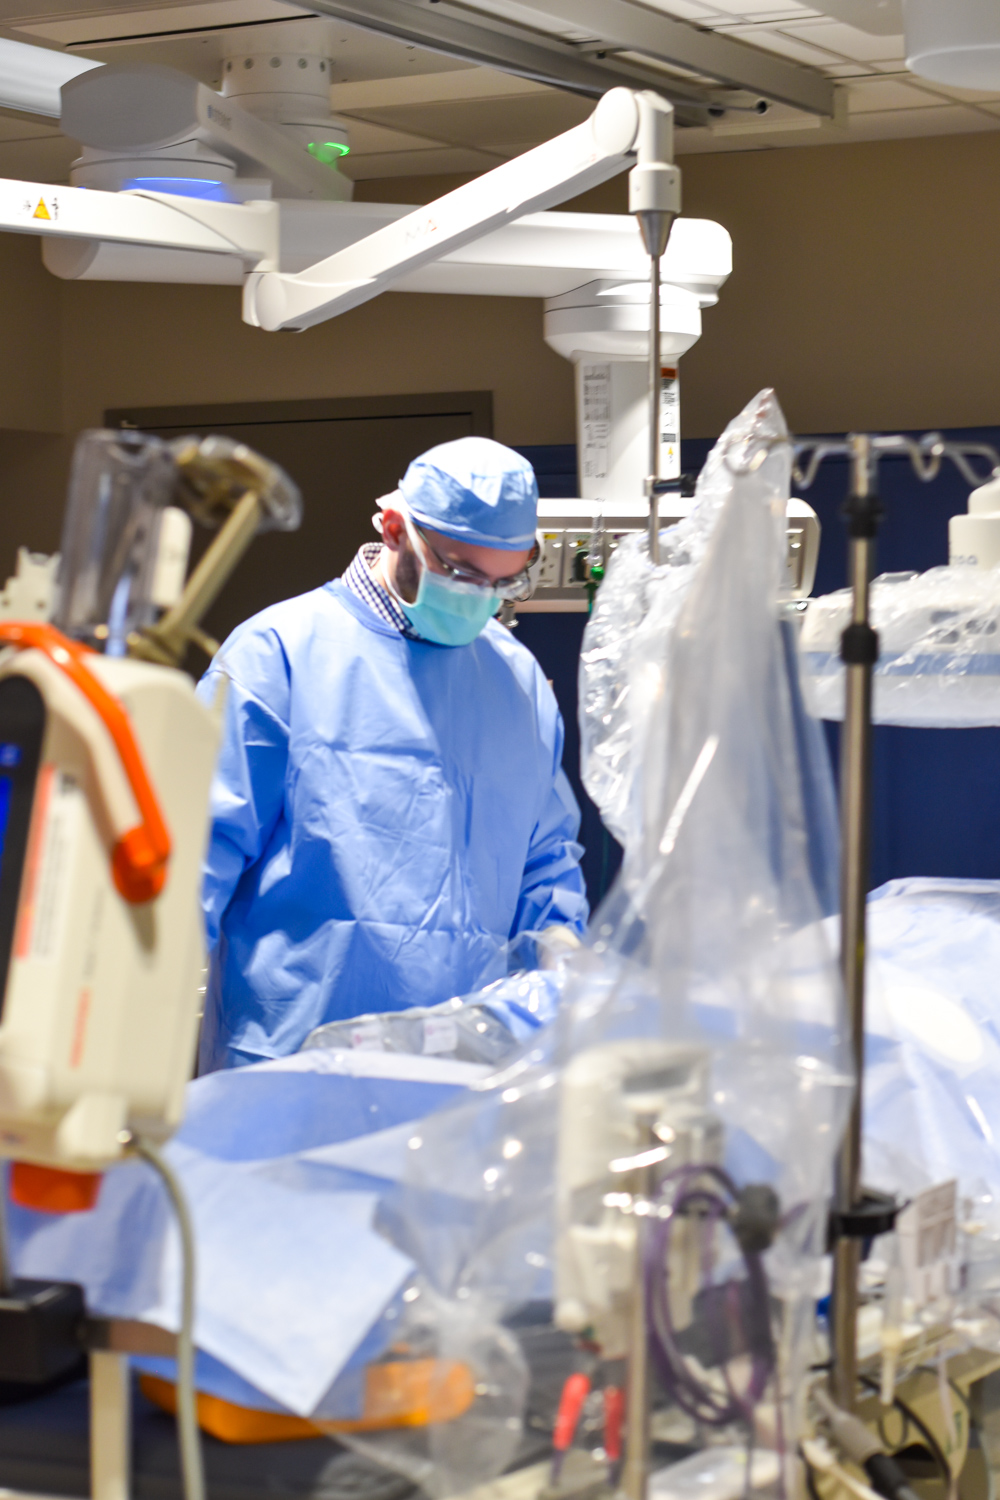 Alaa Boulad, MD, interventional cardiologist at William Newton Cardiology, performs a heart catheterization procedure at William Newton Hospital.